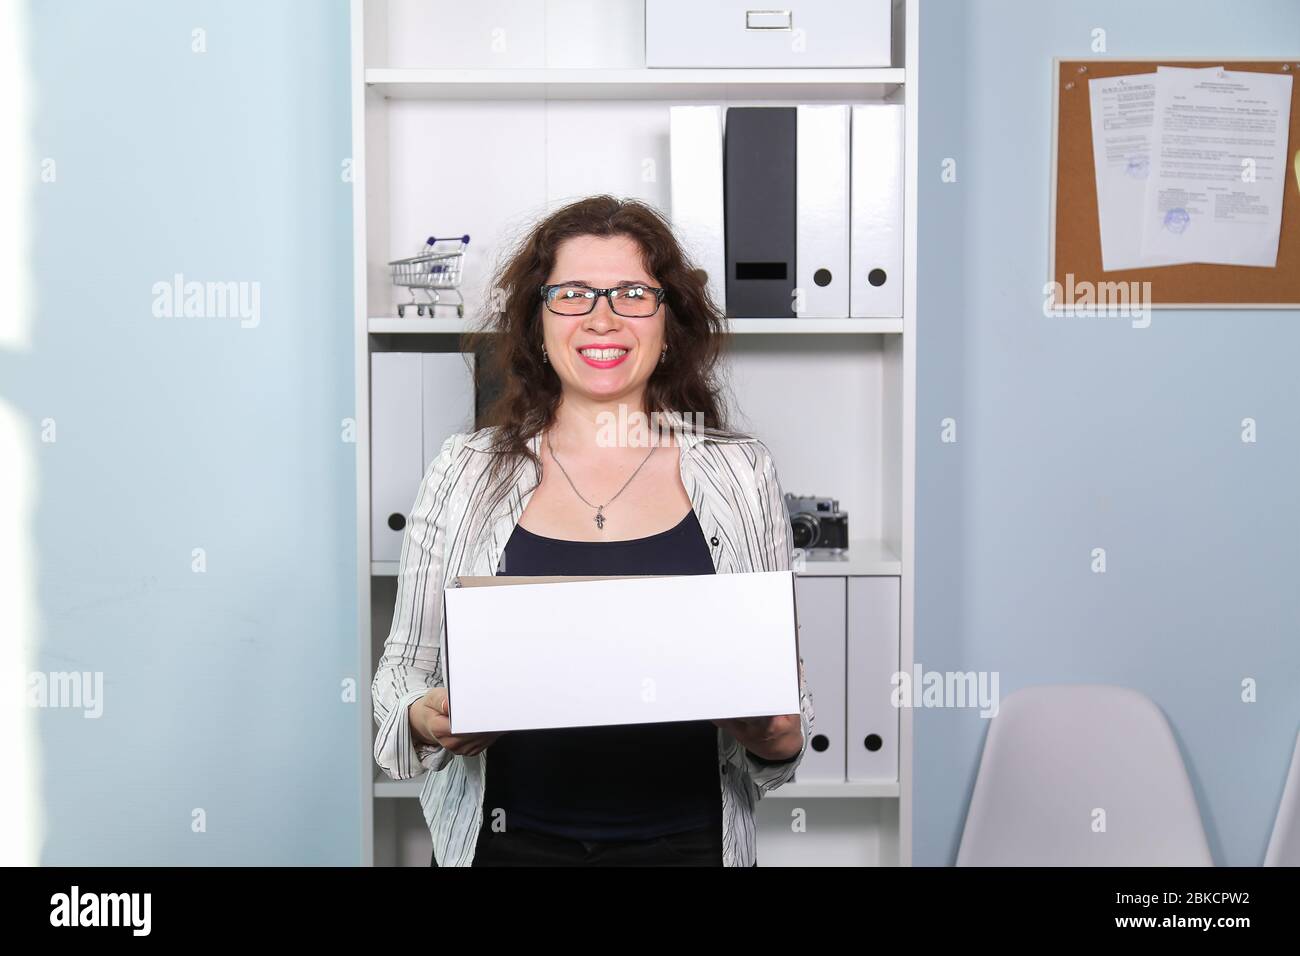 Concept of dismissal from work. Happy woman with carton box with her stationery stuff, girl was fired from her job. Stock Photo